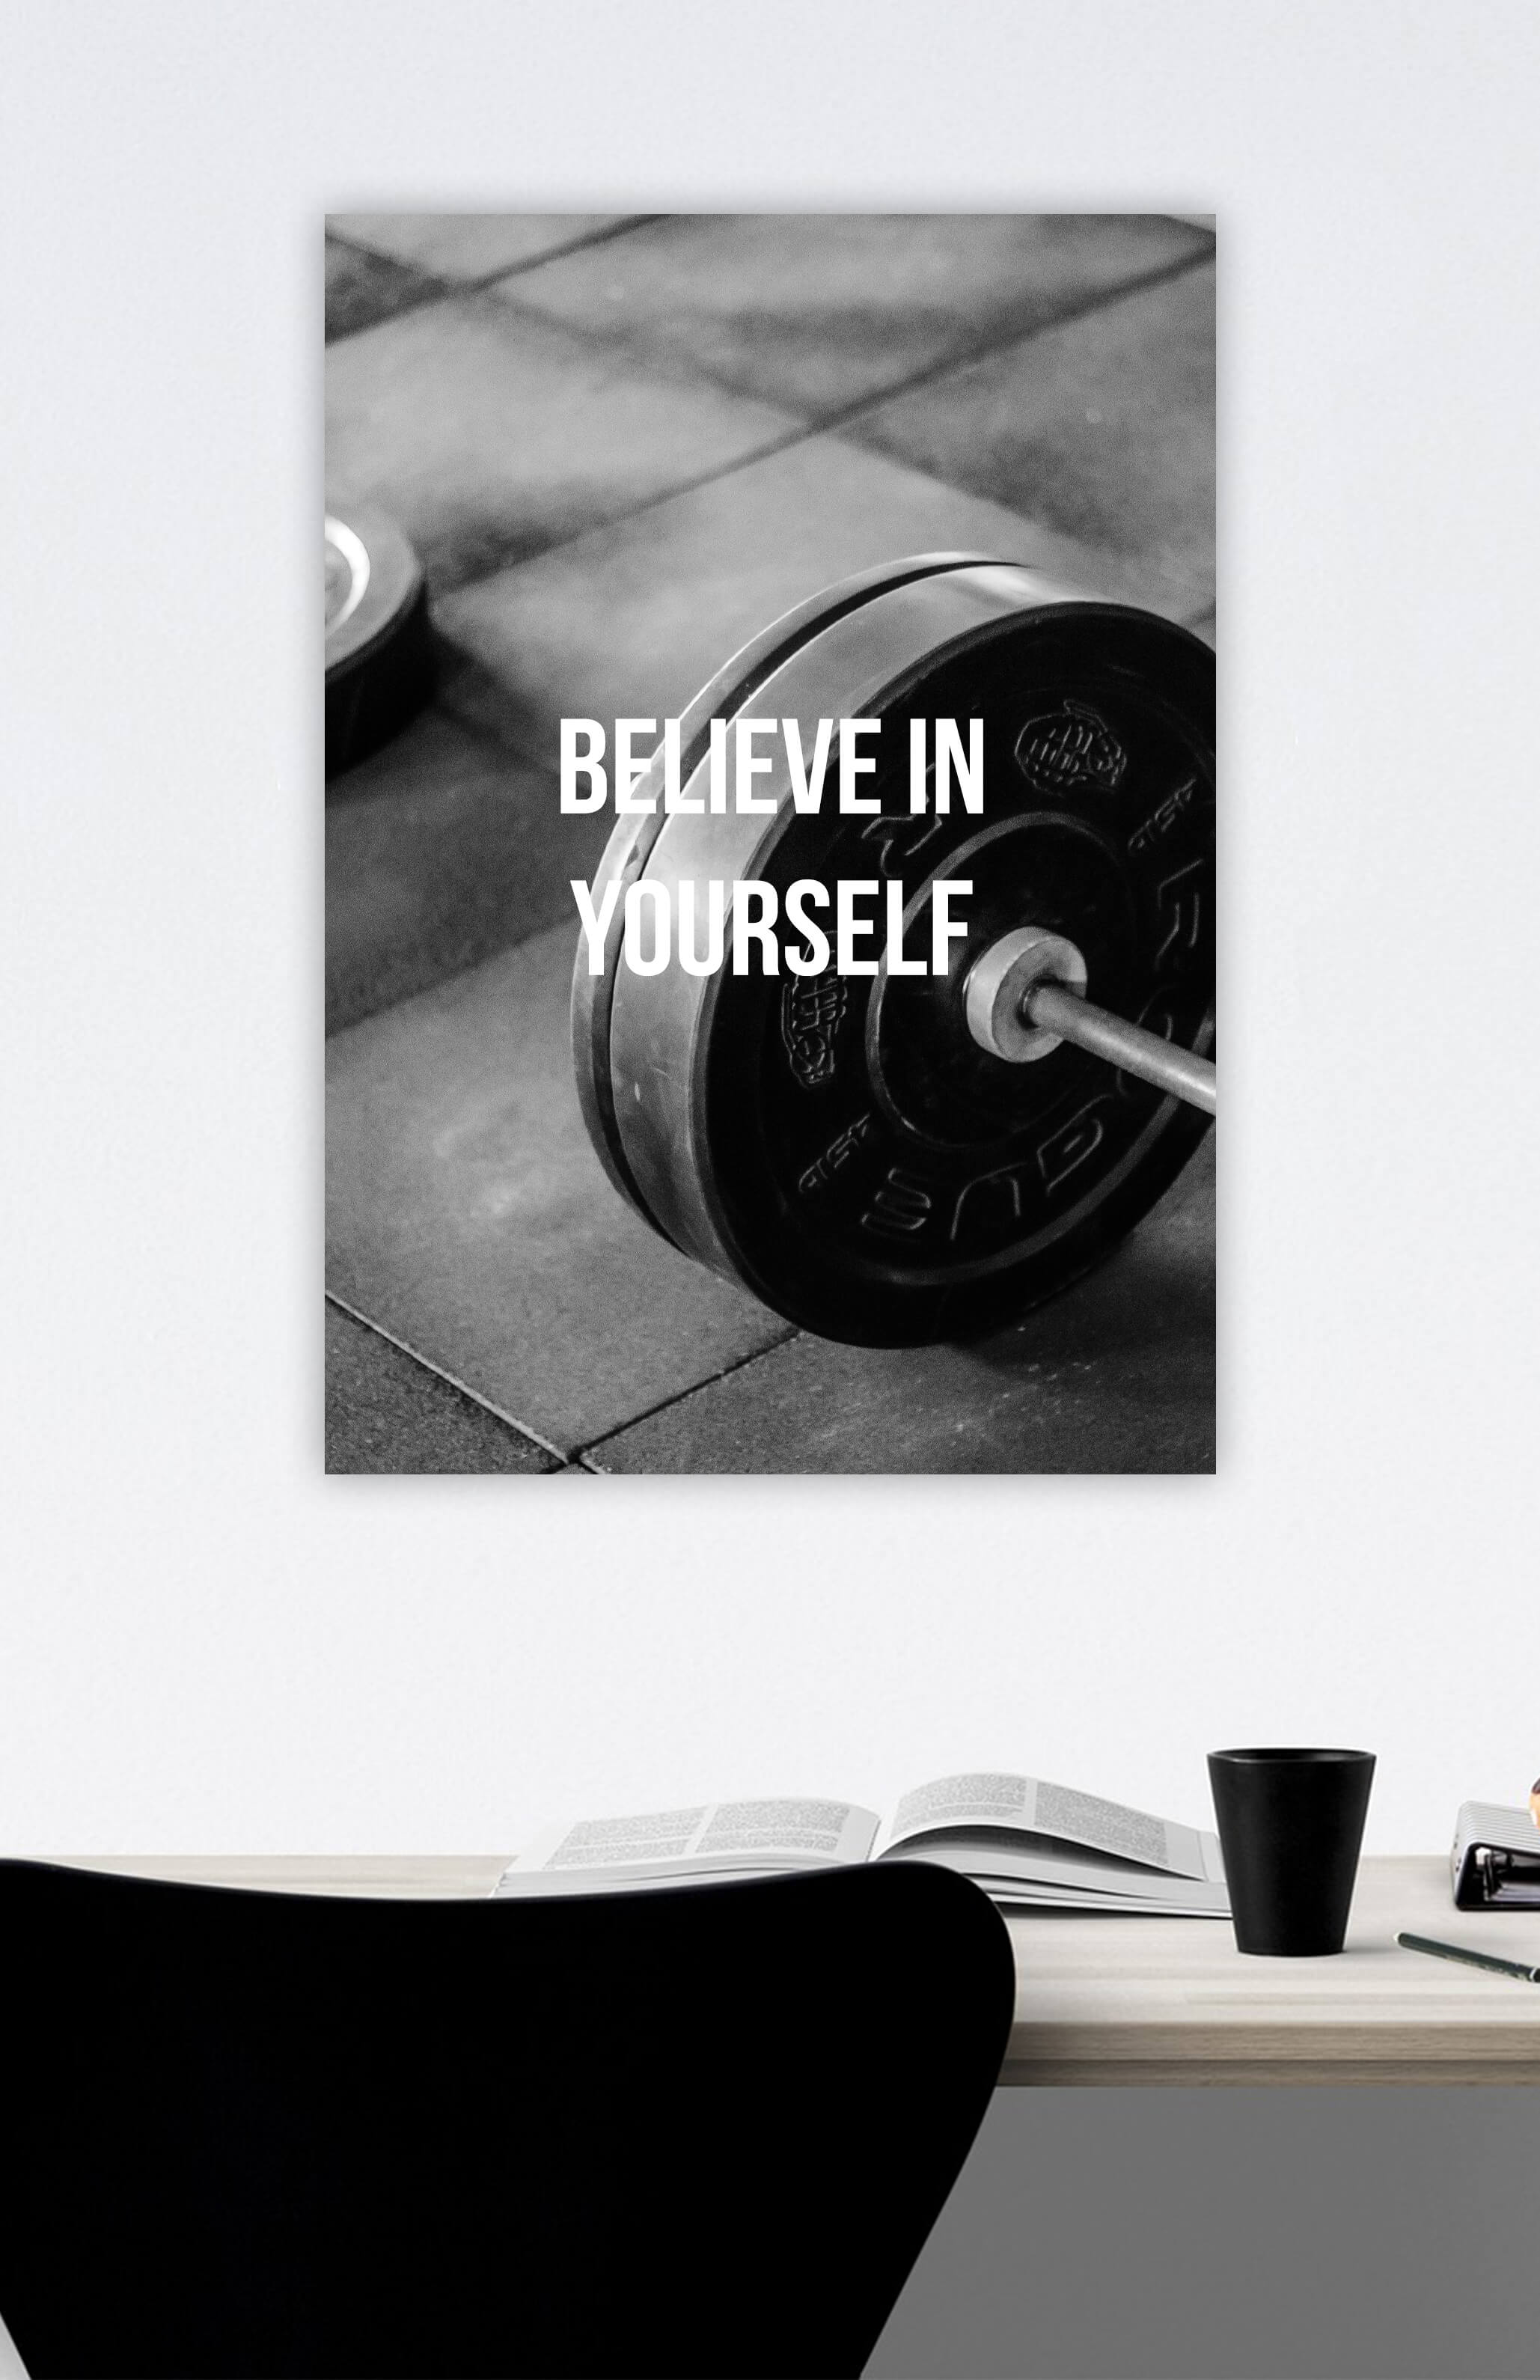 V3 Apparel womens Believe In Yourself, Motivational posters, mens inspirational wall artwork and empowering poster quote designs for office, home gym, school, kitchen and living room.